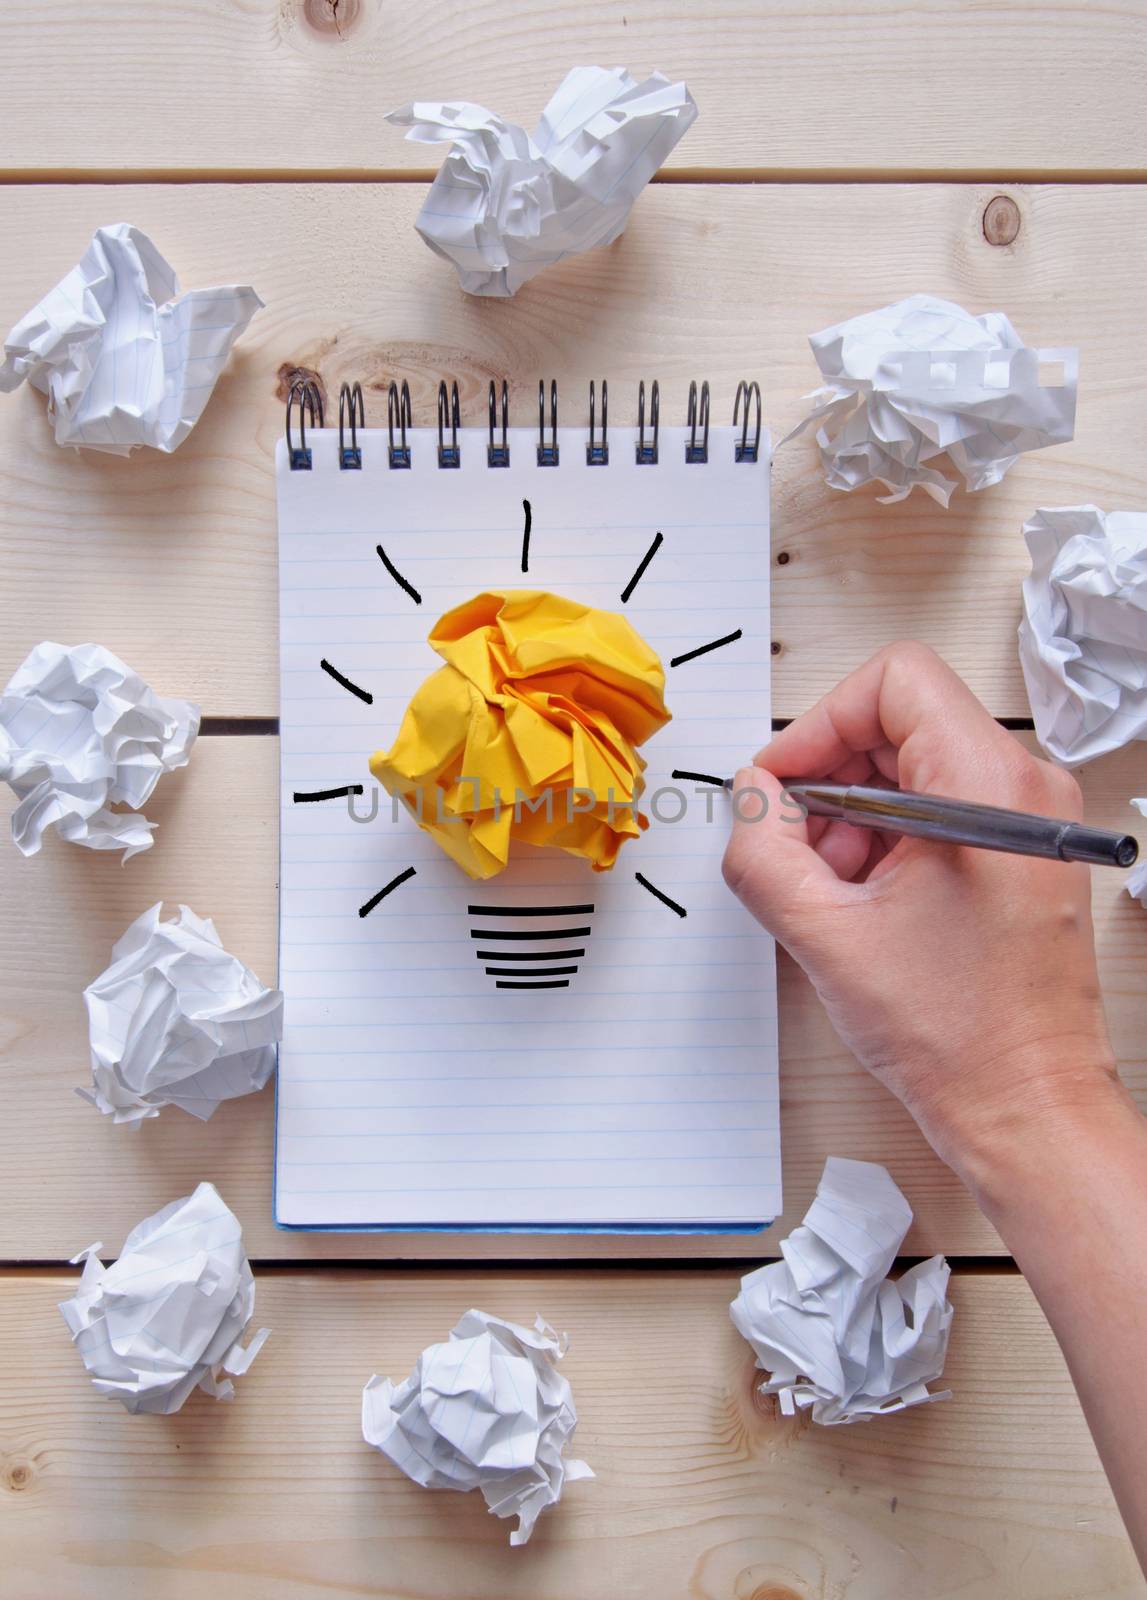 Drawing of a light bulb on a notepad with bright orange paper surrounded by crumpled pieces of paper 